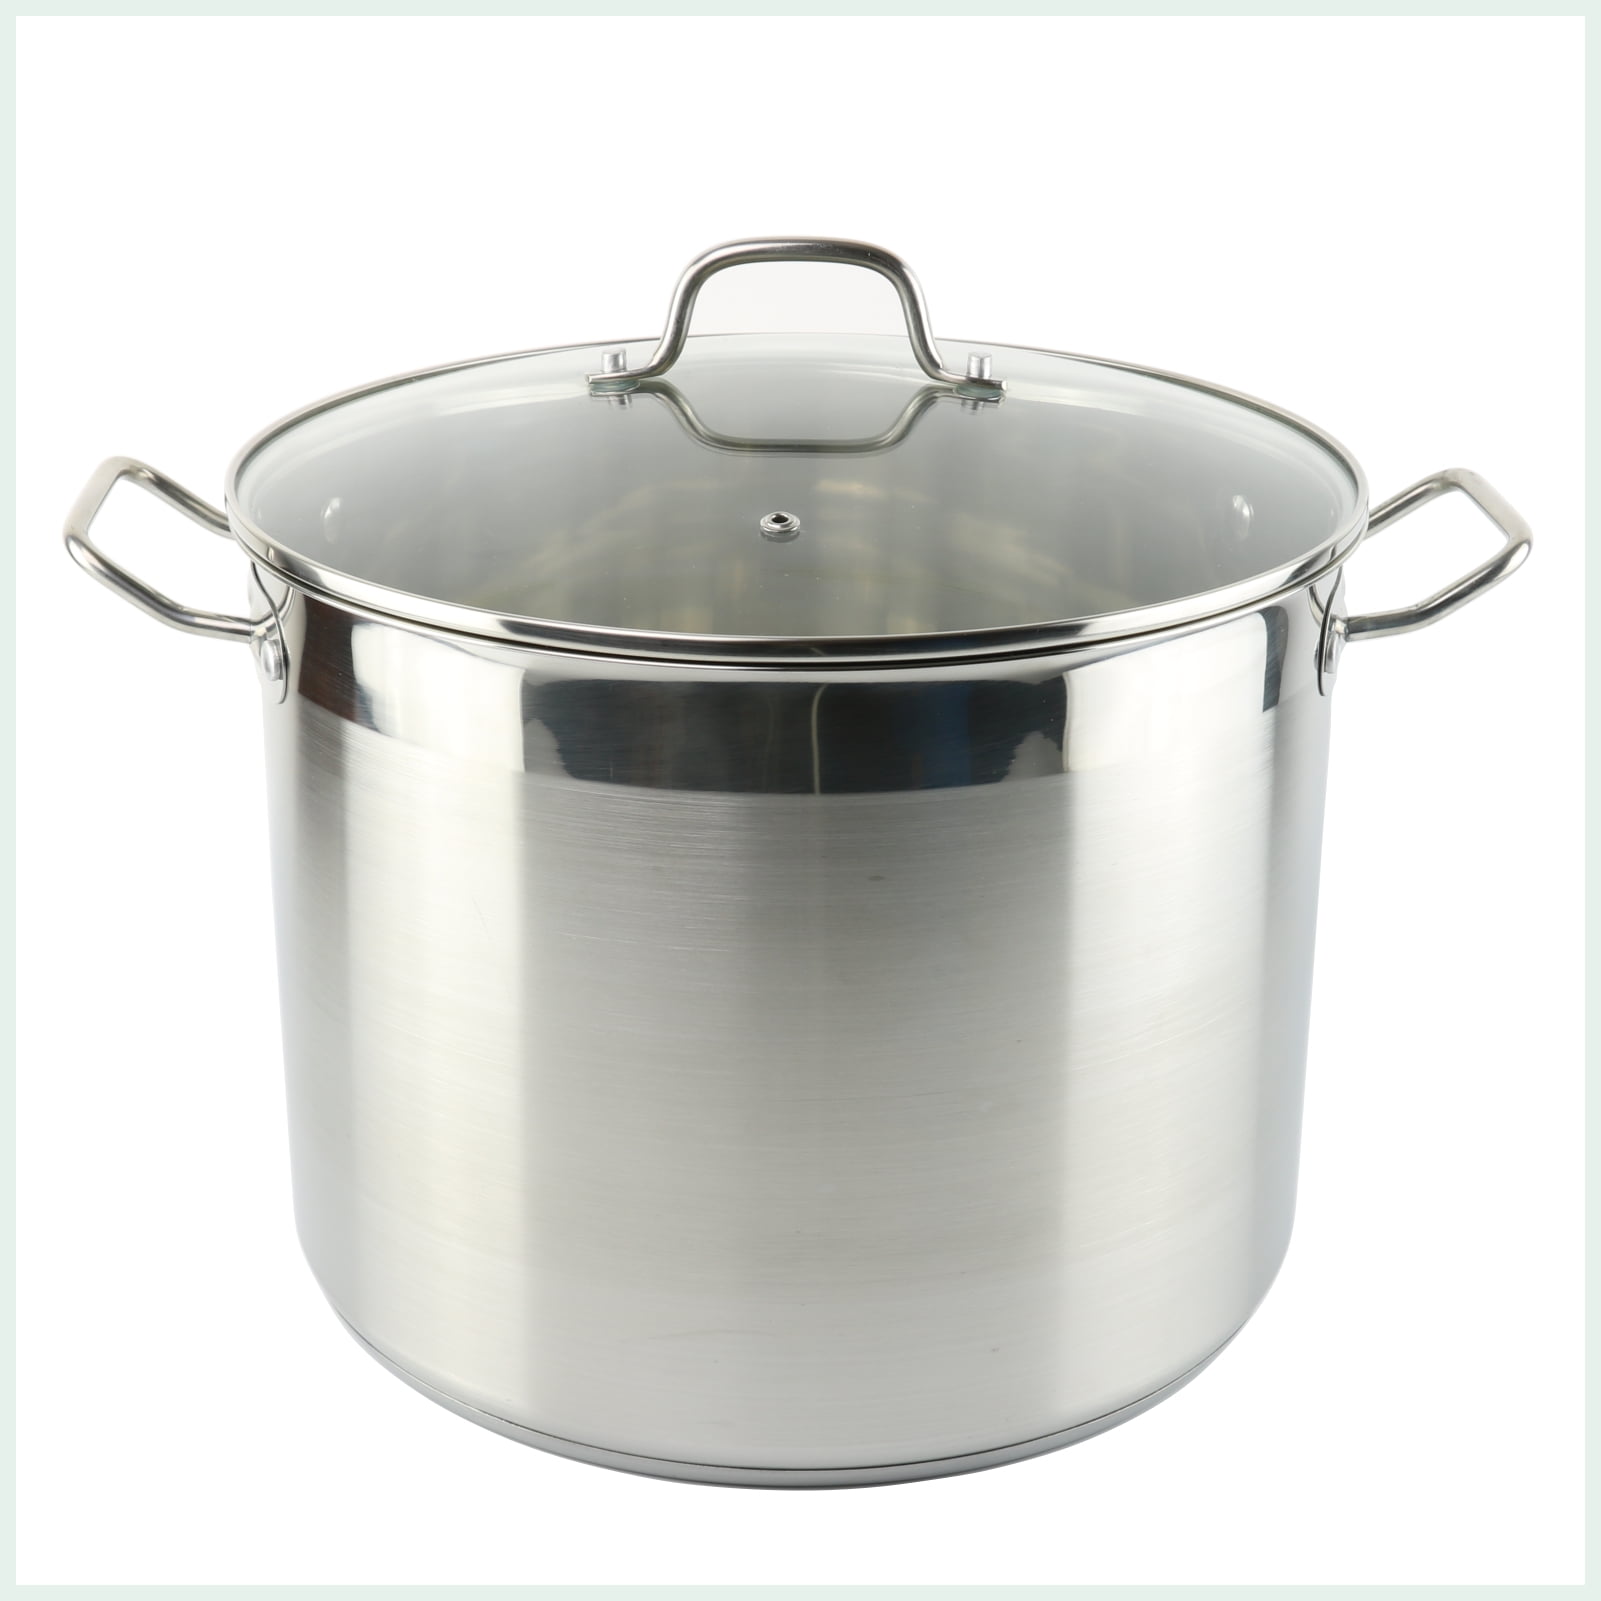 stainless steel water bath cannner with canner rack for 7 x 0.5L canning jars